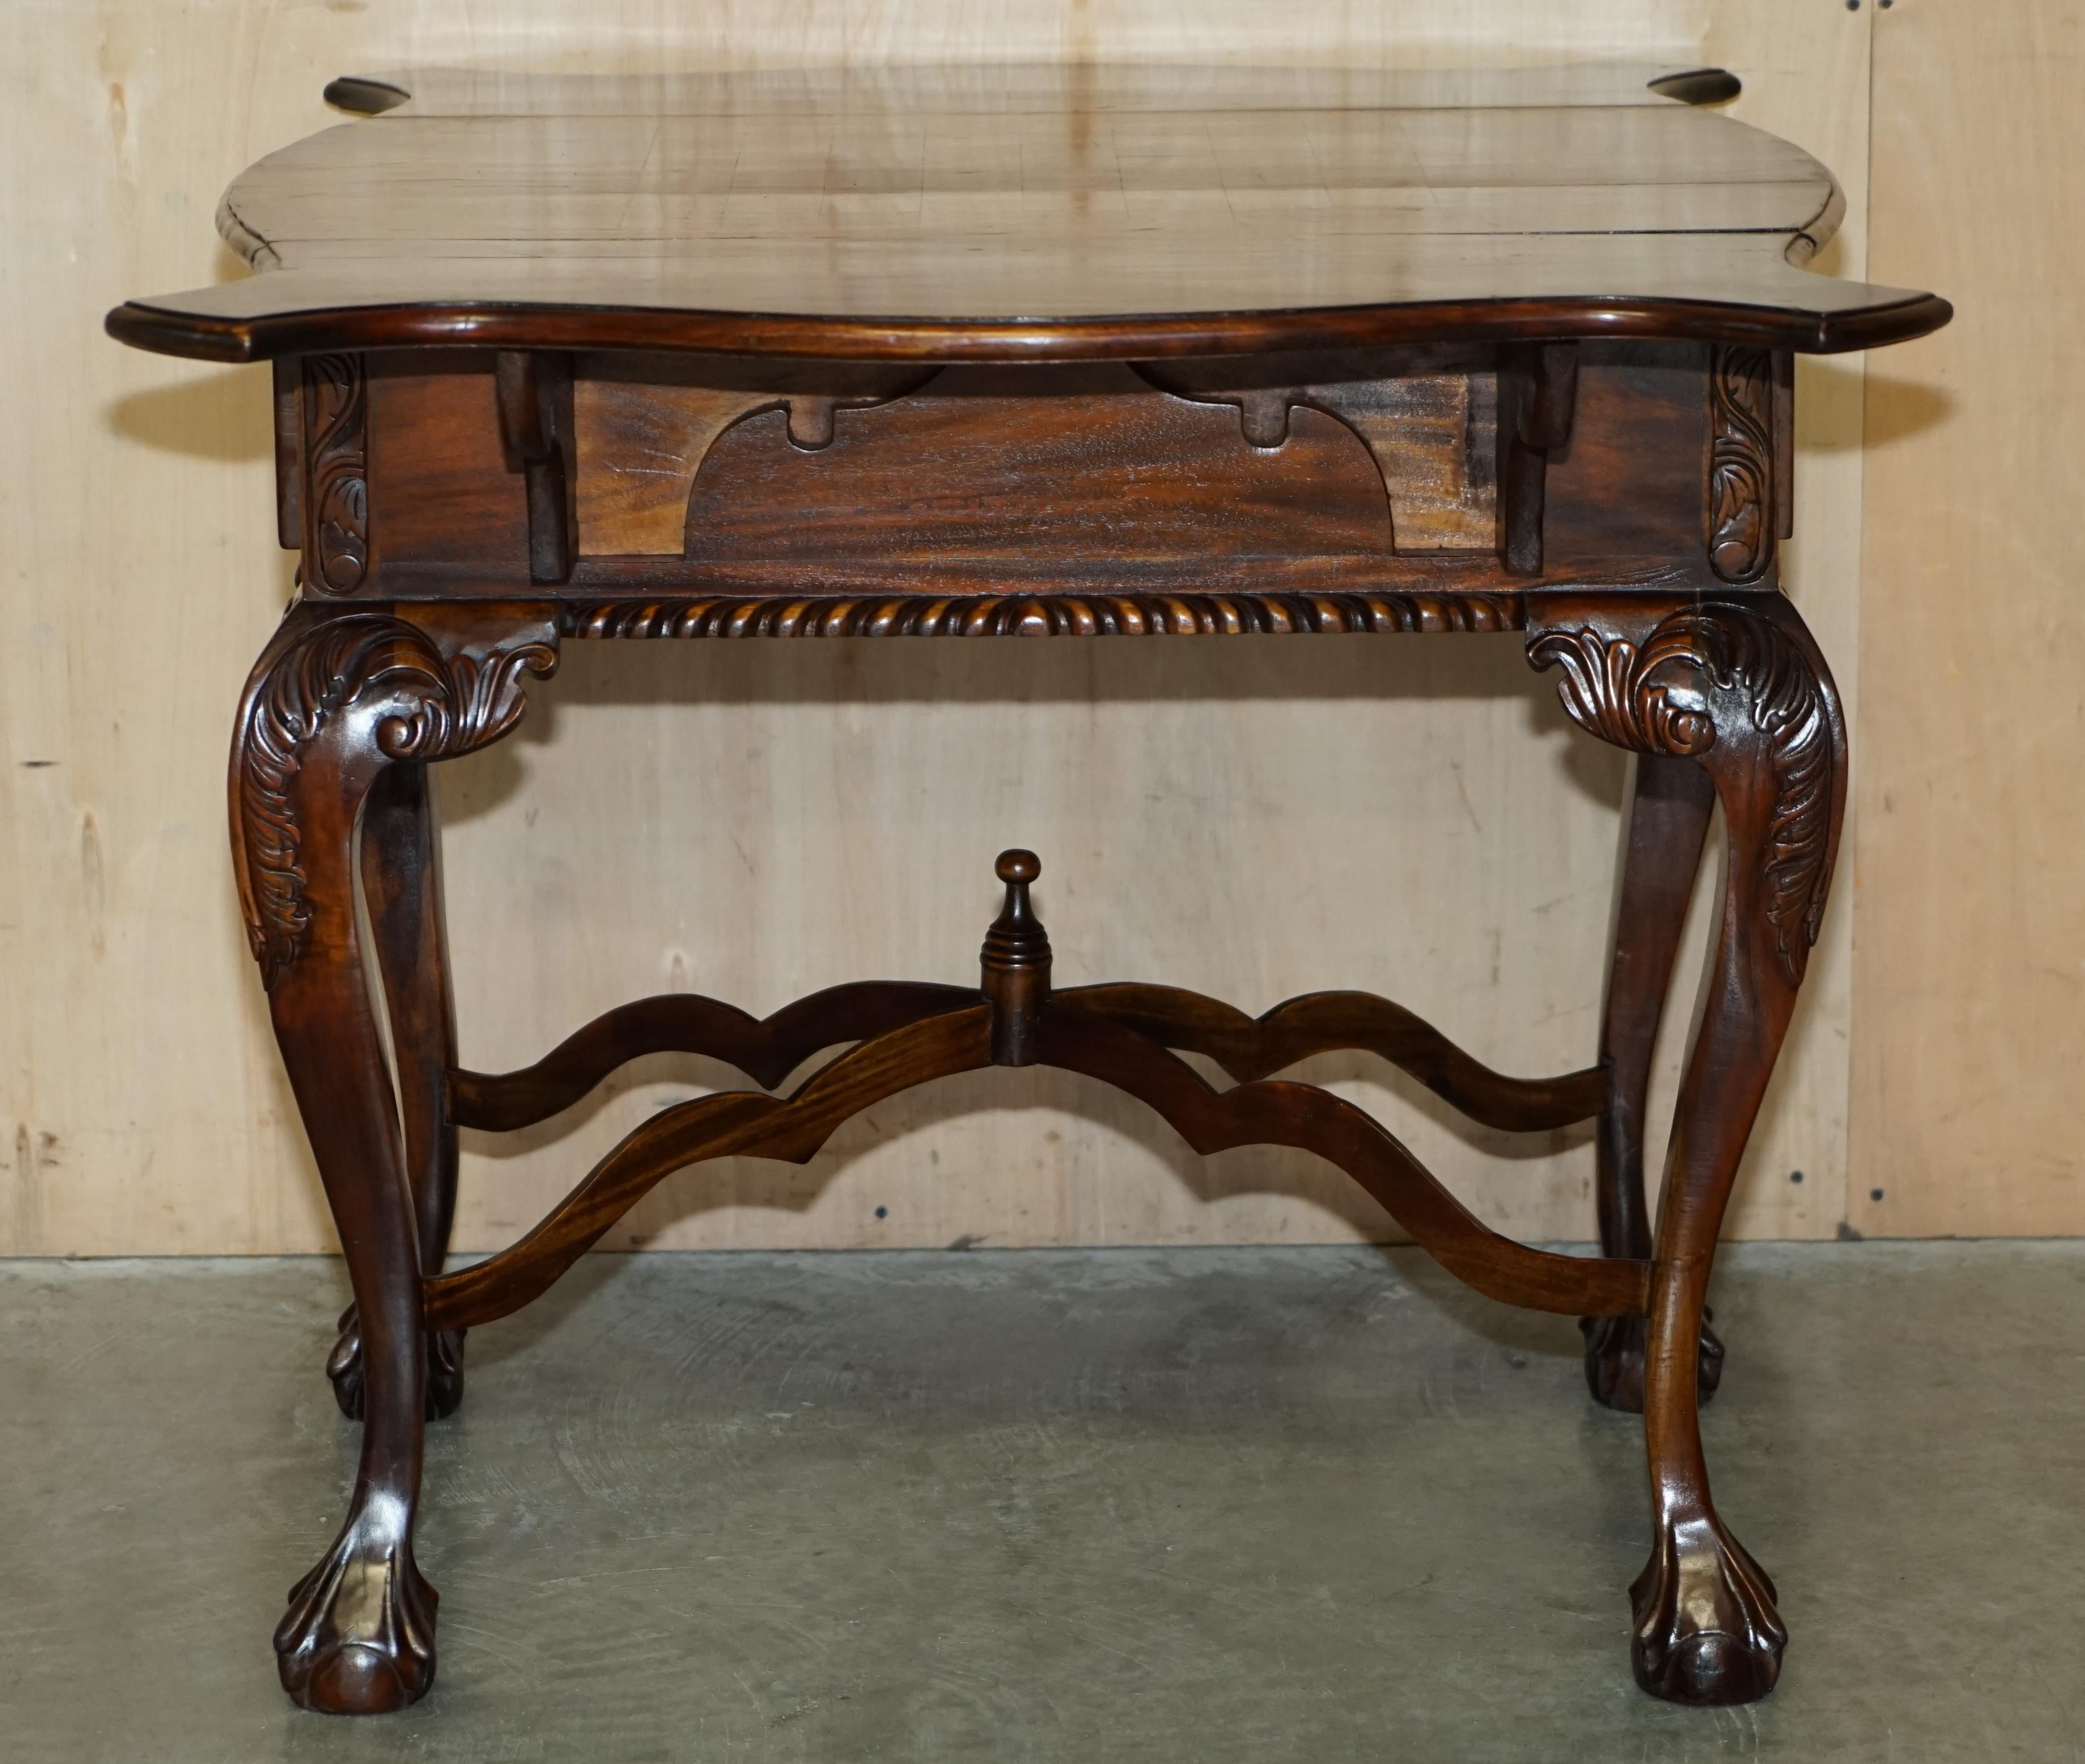 EXQUISITE THOMAS CHIPPENDALE STYLE CLAW & BALL FEET EXTENDiNG CHESS BOARD TABLE For Sale 7